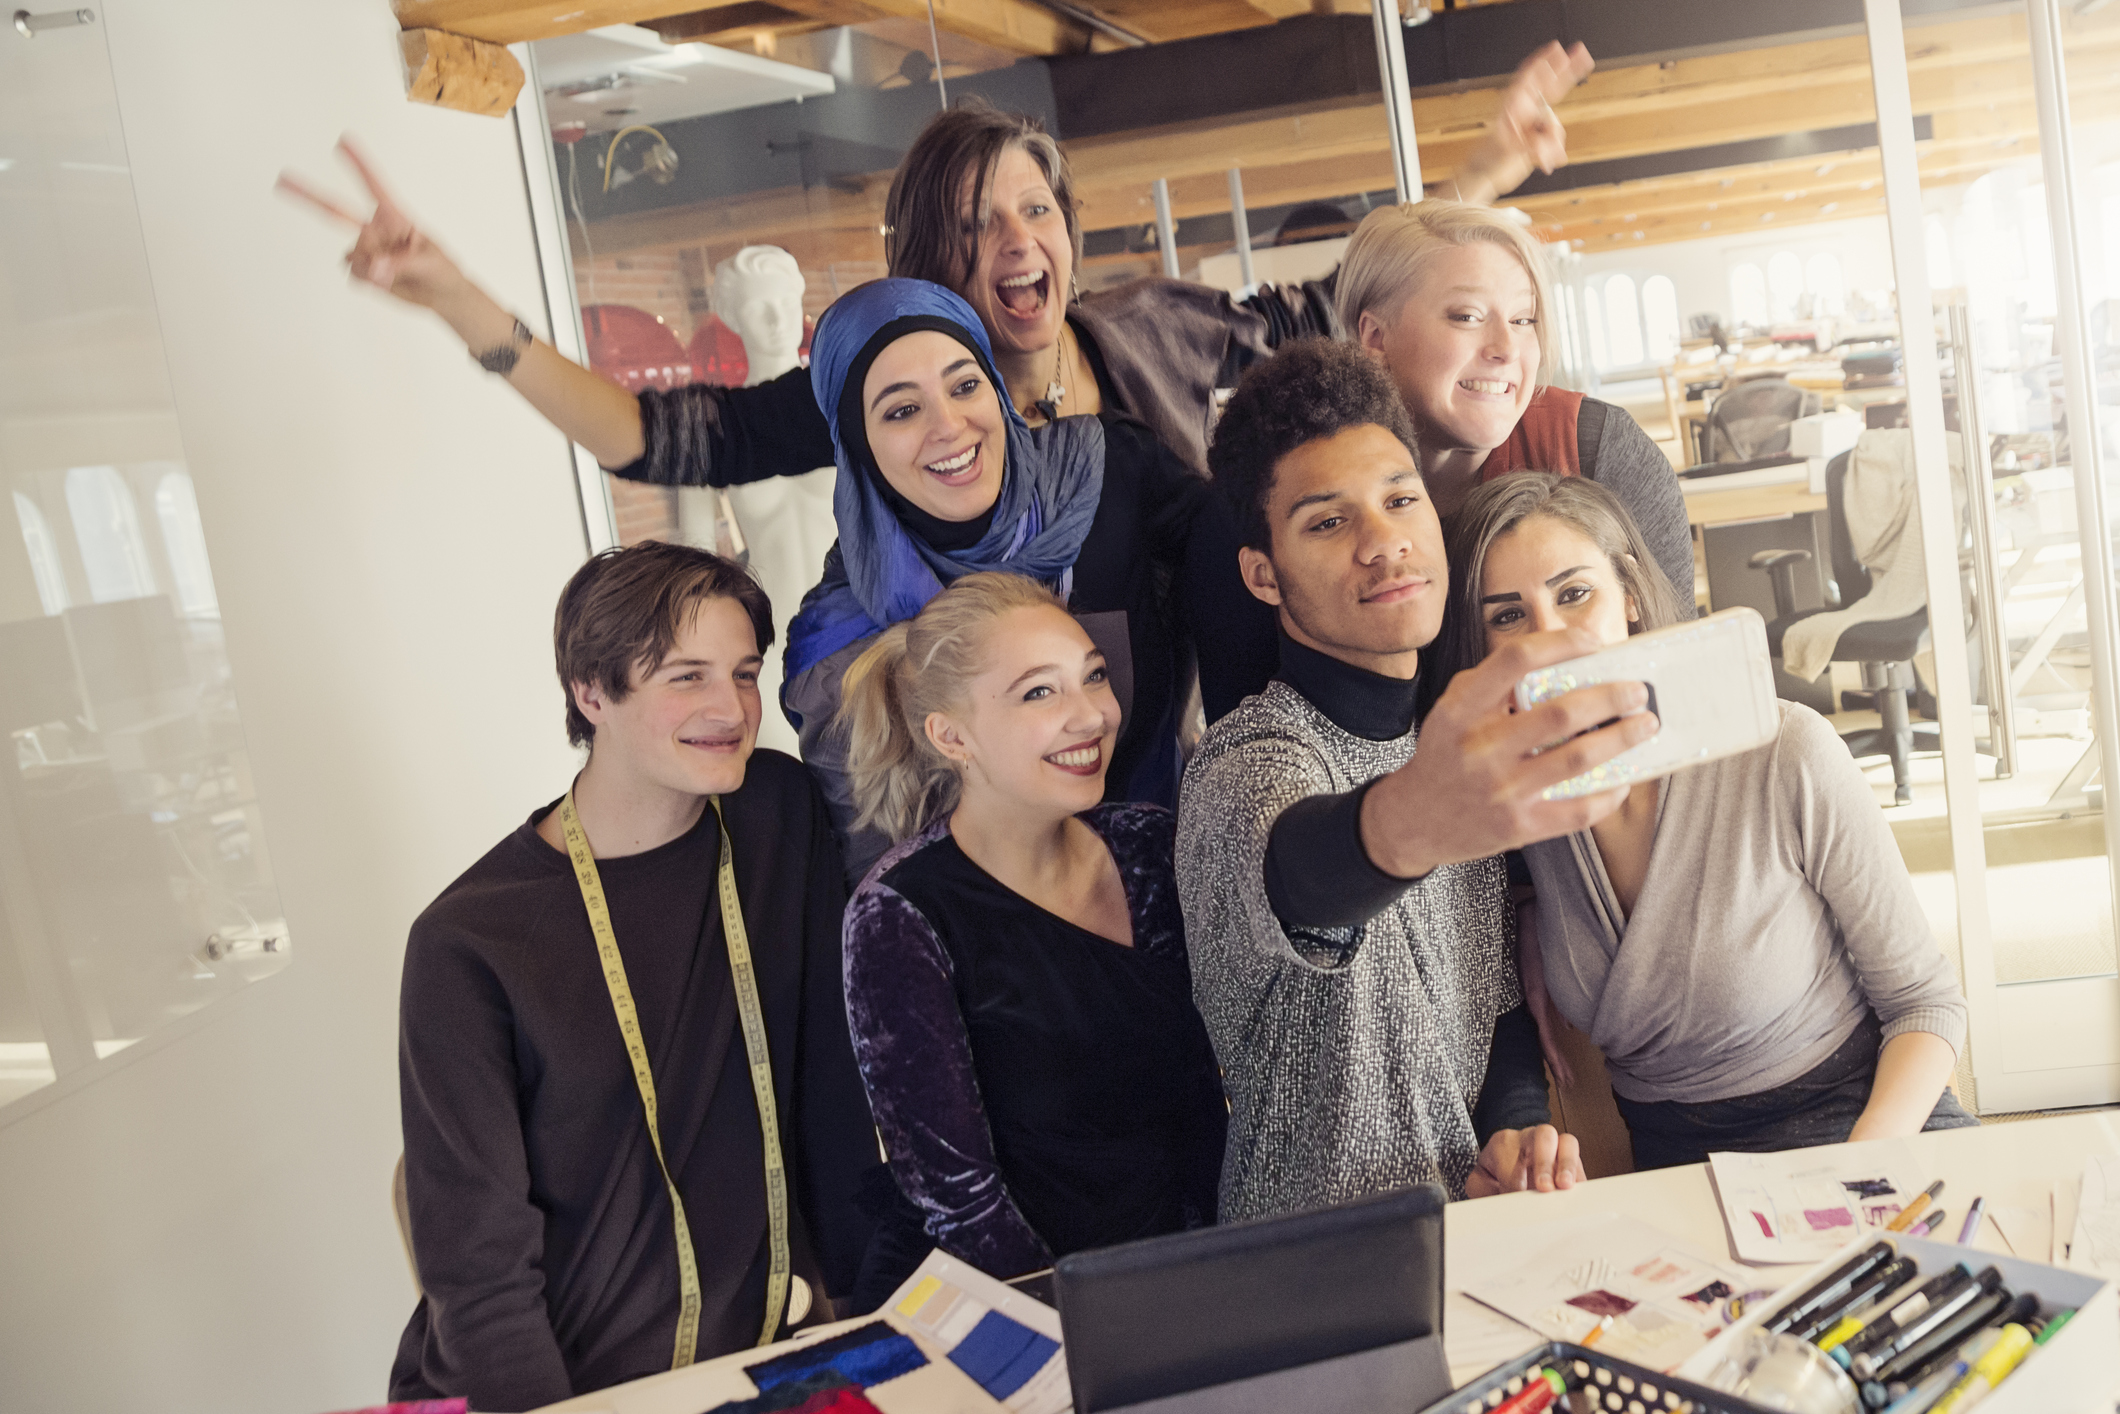 Selfie time for small creative start-up enterprise lead by woman